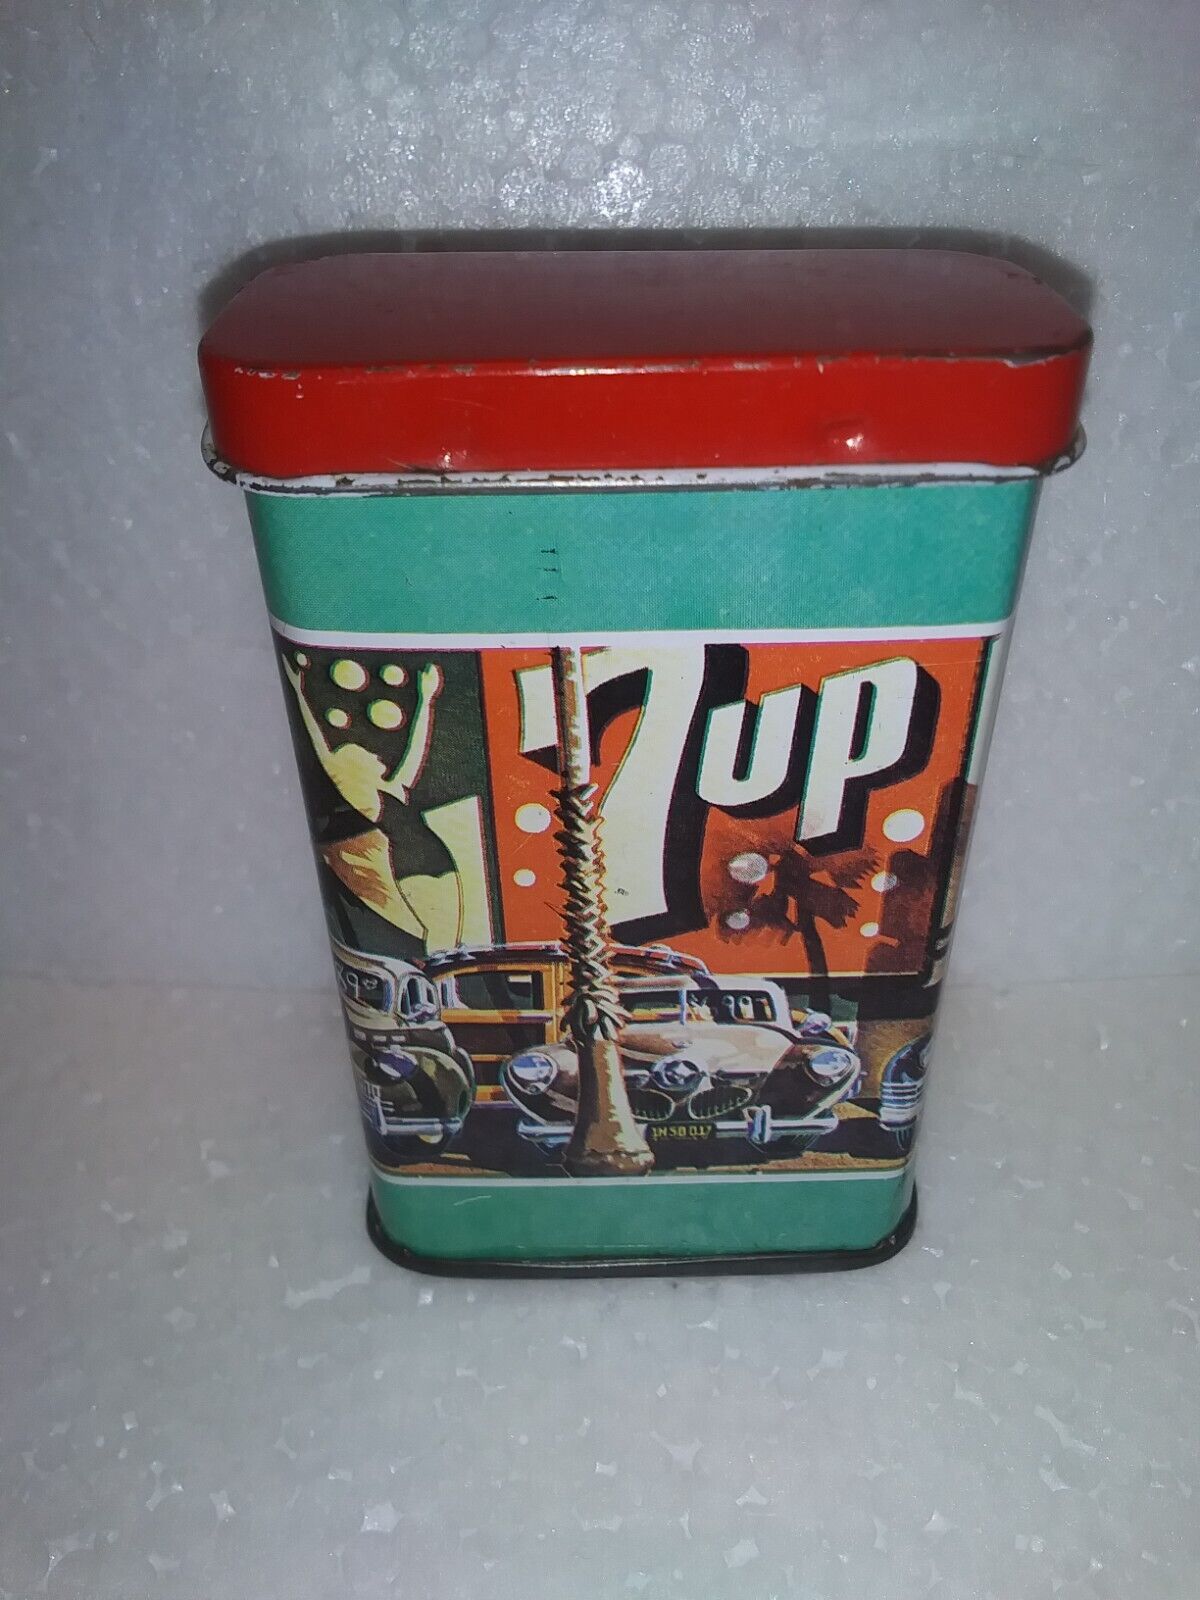 Vintage Classic Cars 7up Advertising Metal Tin Container